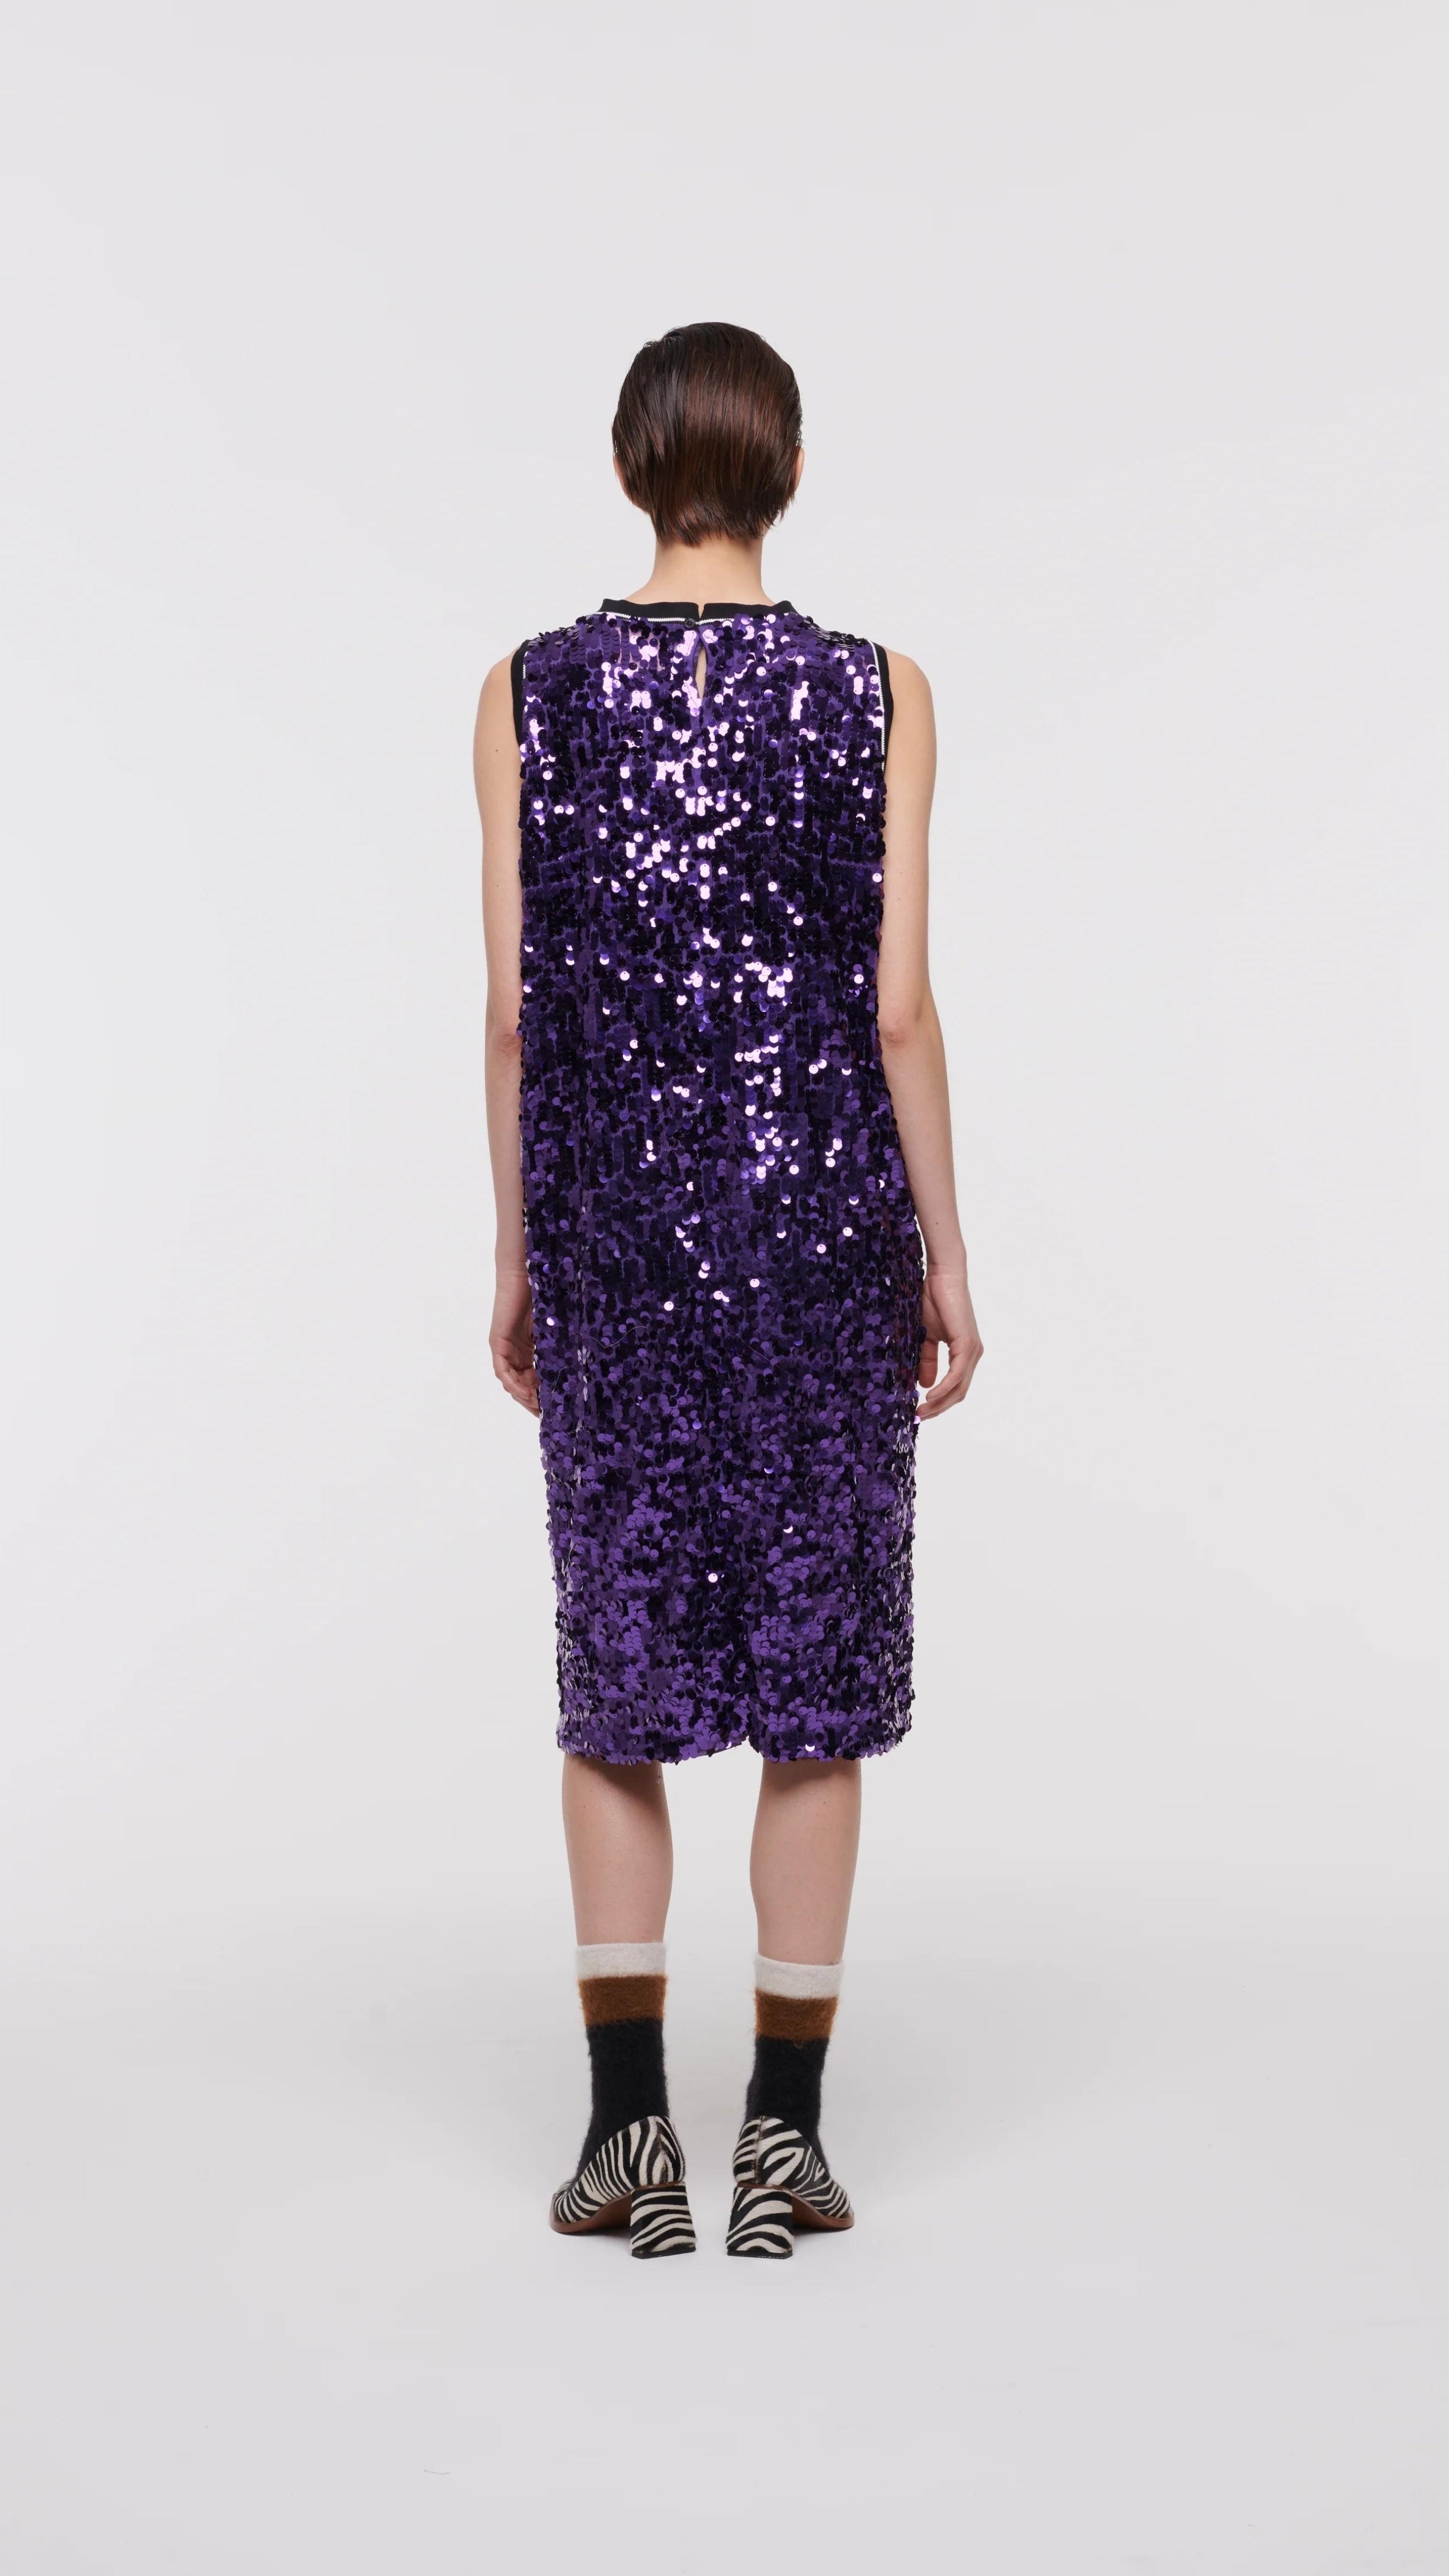 Plan C Color Block Sequin Dress. Sleeveless racer back style midi length dress in purple and lime green. Trimmed in black at the neckline and arms. The green sequins form a v shape in the front. Shown on model facing back.